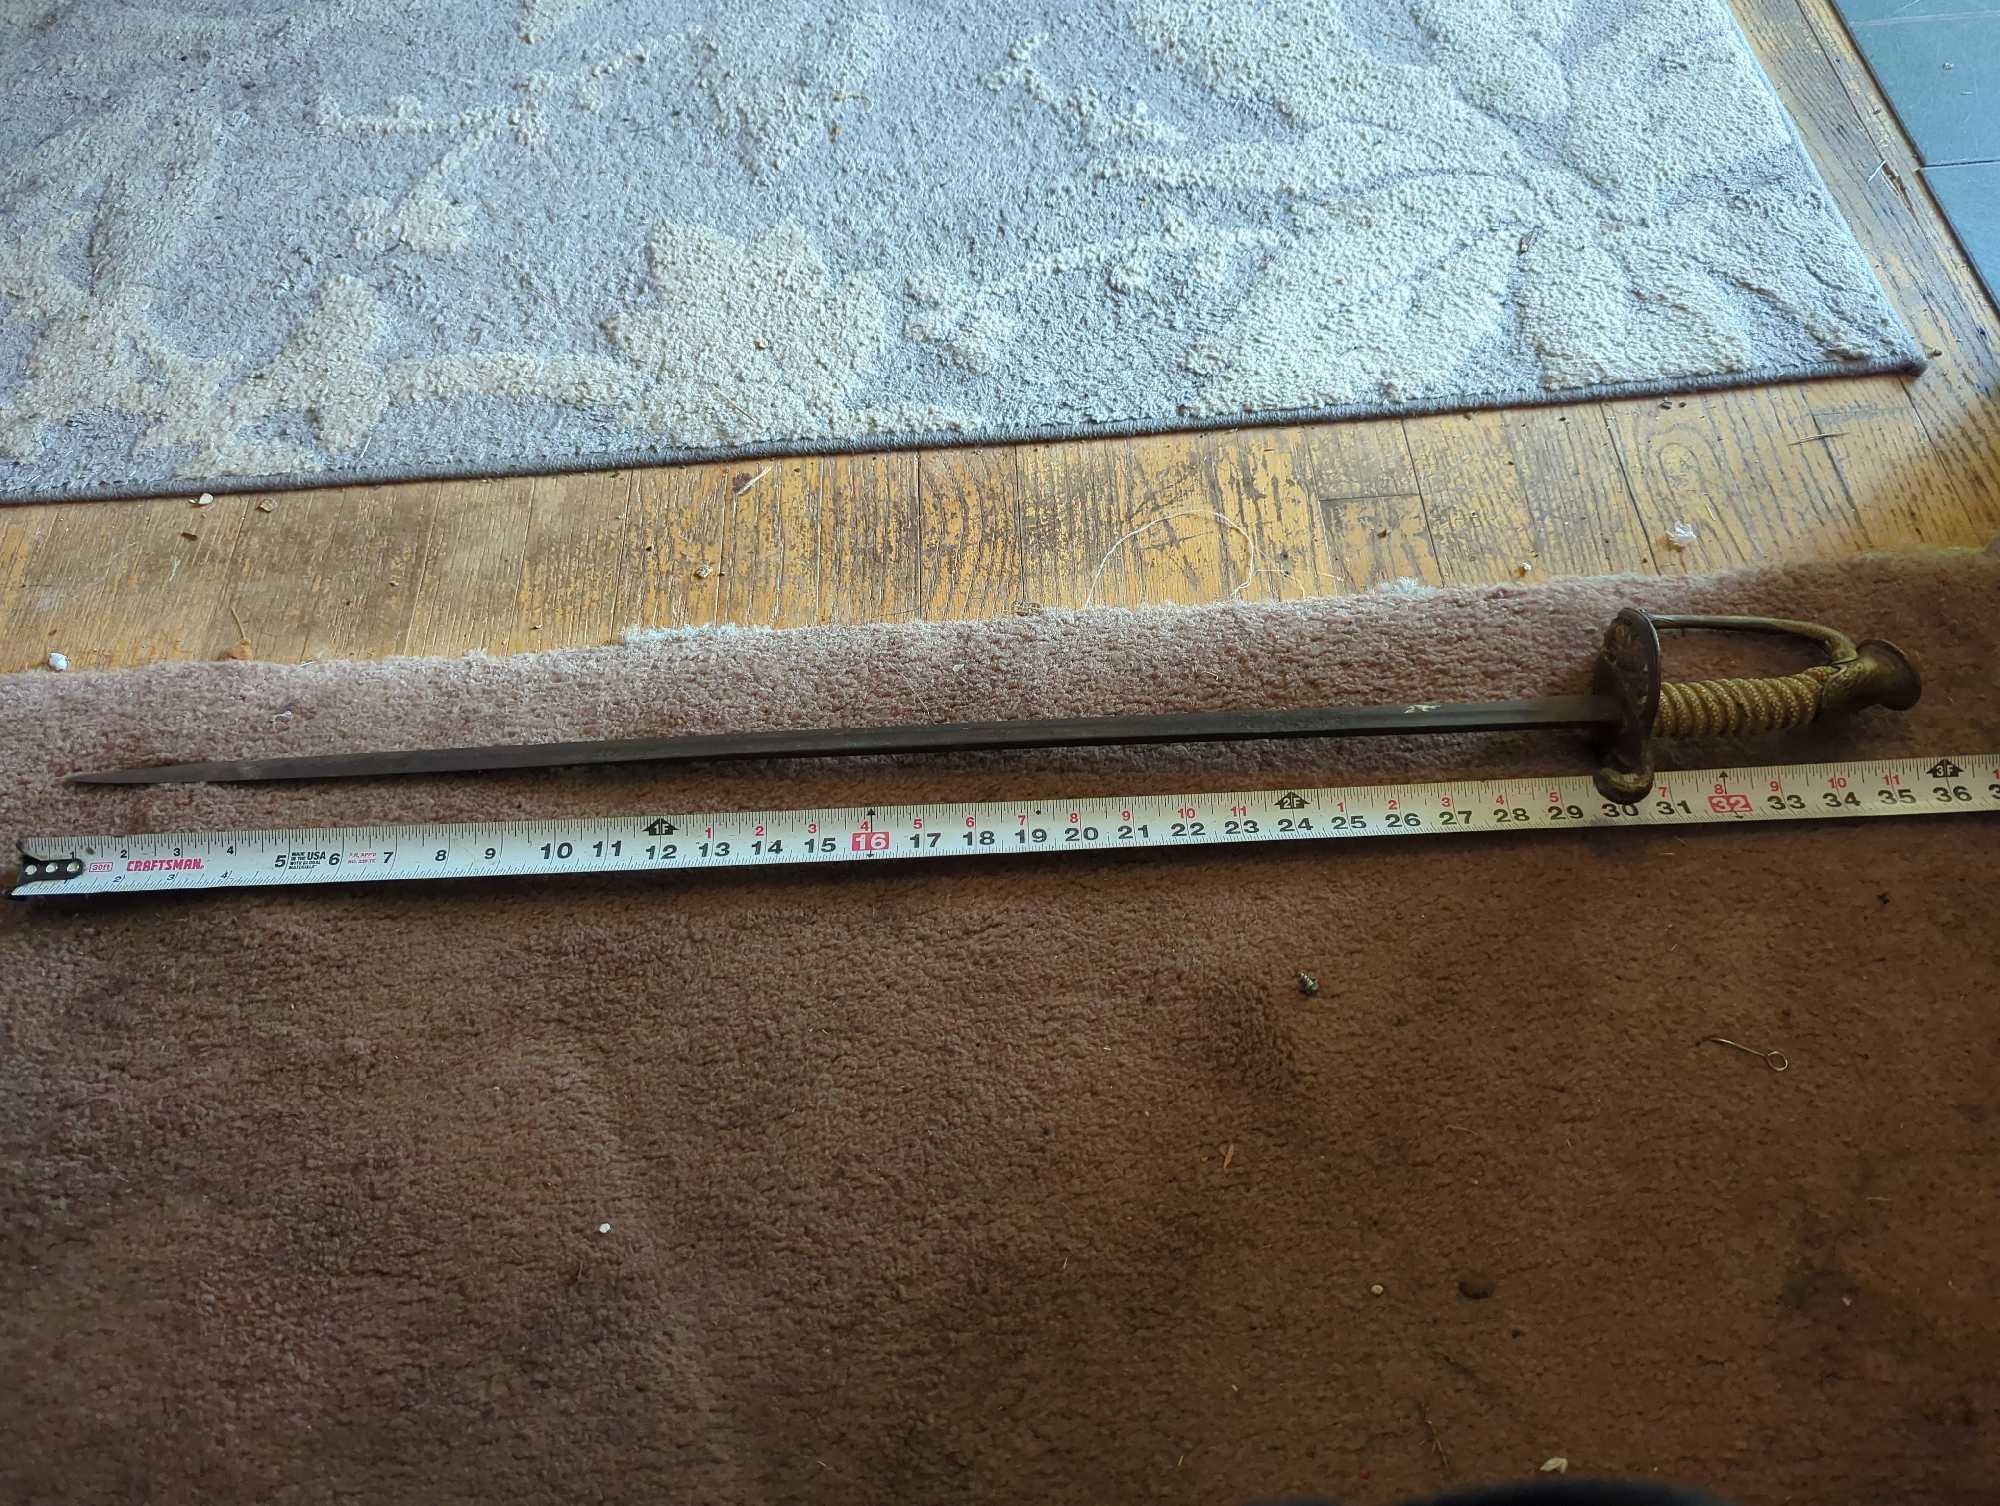 (LR)WWII USA U.S.N. OFFICER'S SABER, THE GRIP IS LOOSE, APPROX 35 1/4" TOTAL LENGTH 30 1/4" BLADE